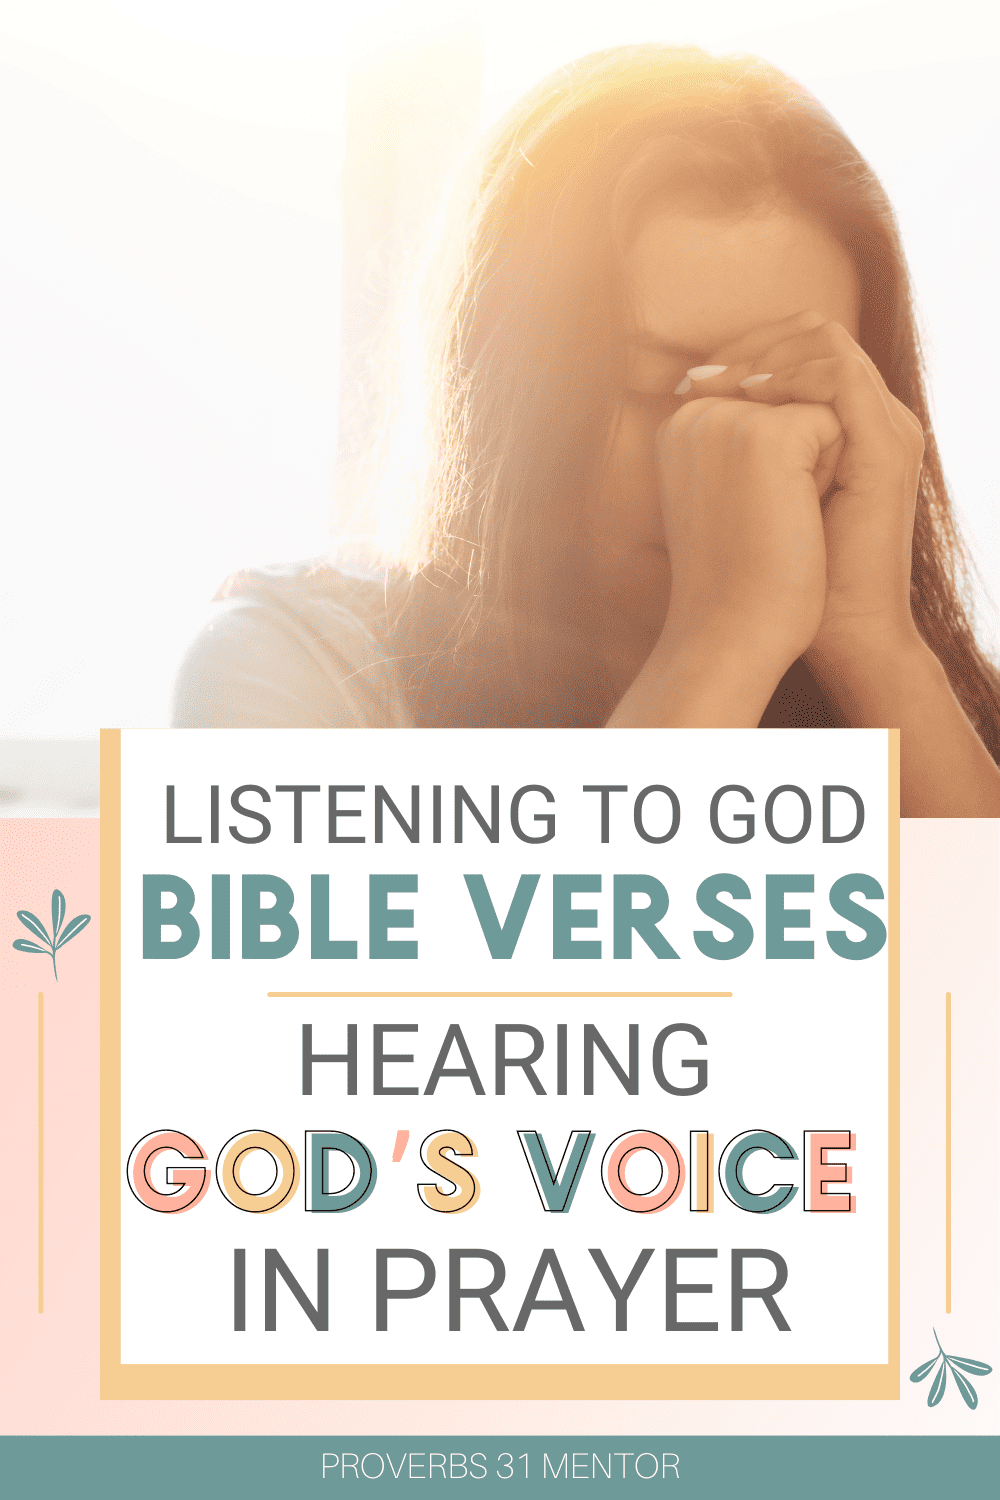 Title- Listening to God Bible Verses: Hearing God's Voice in Prayer Picture: woman praying with folded hands close to her face